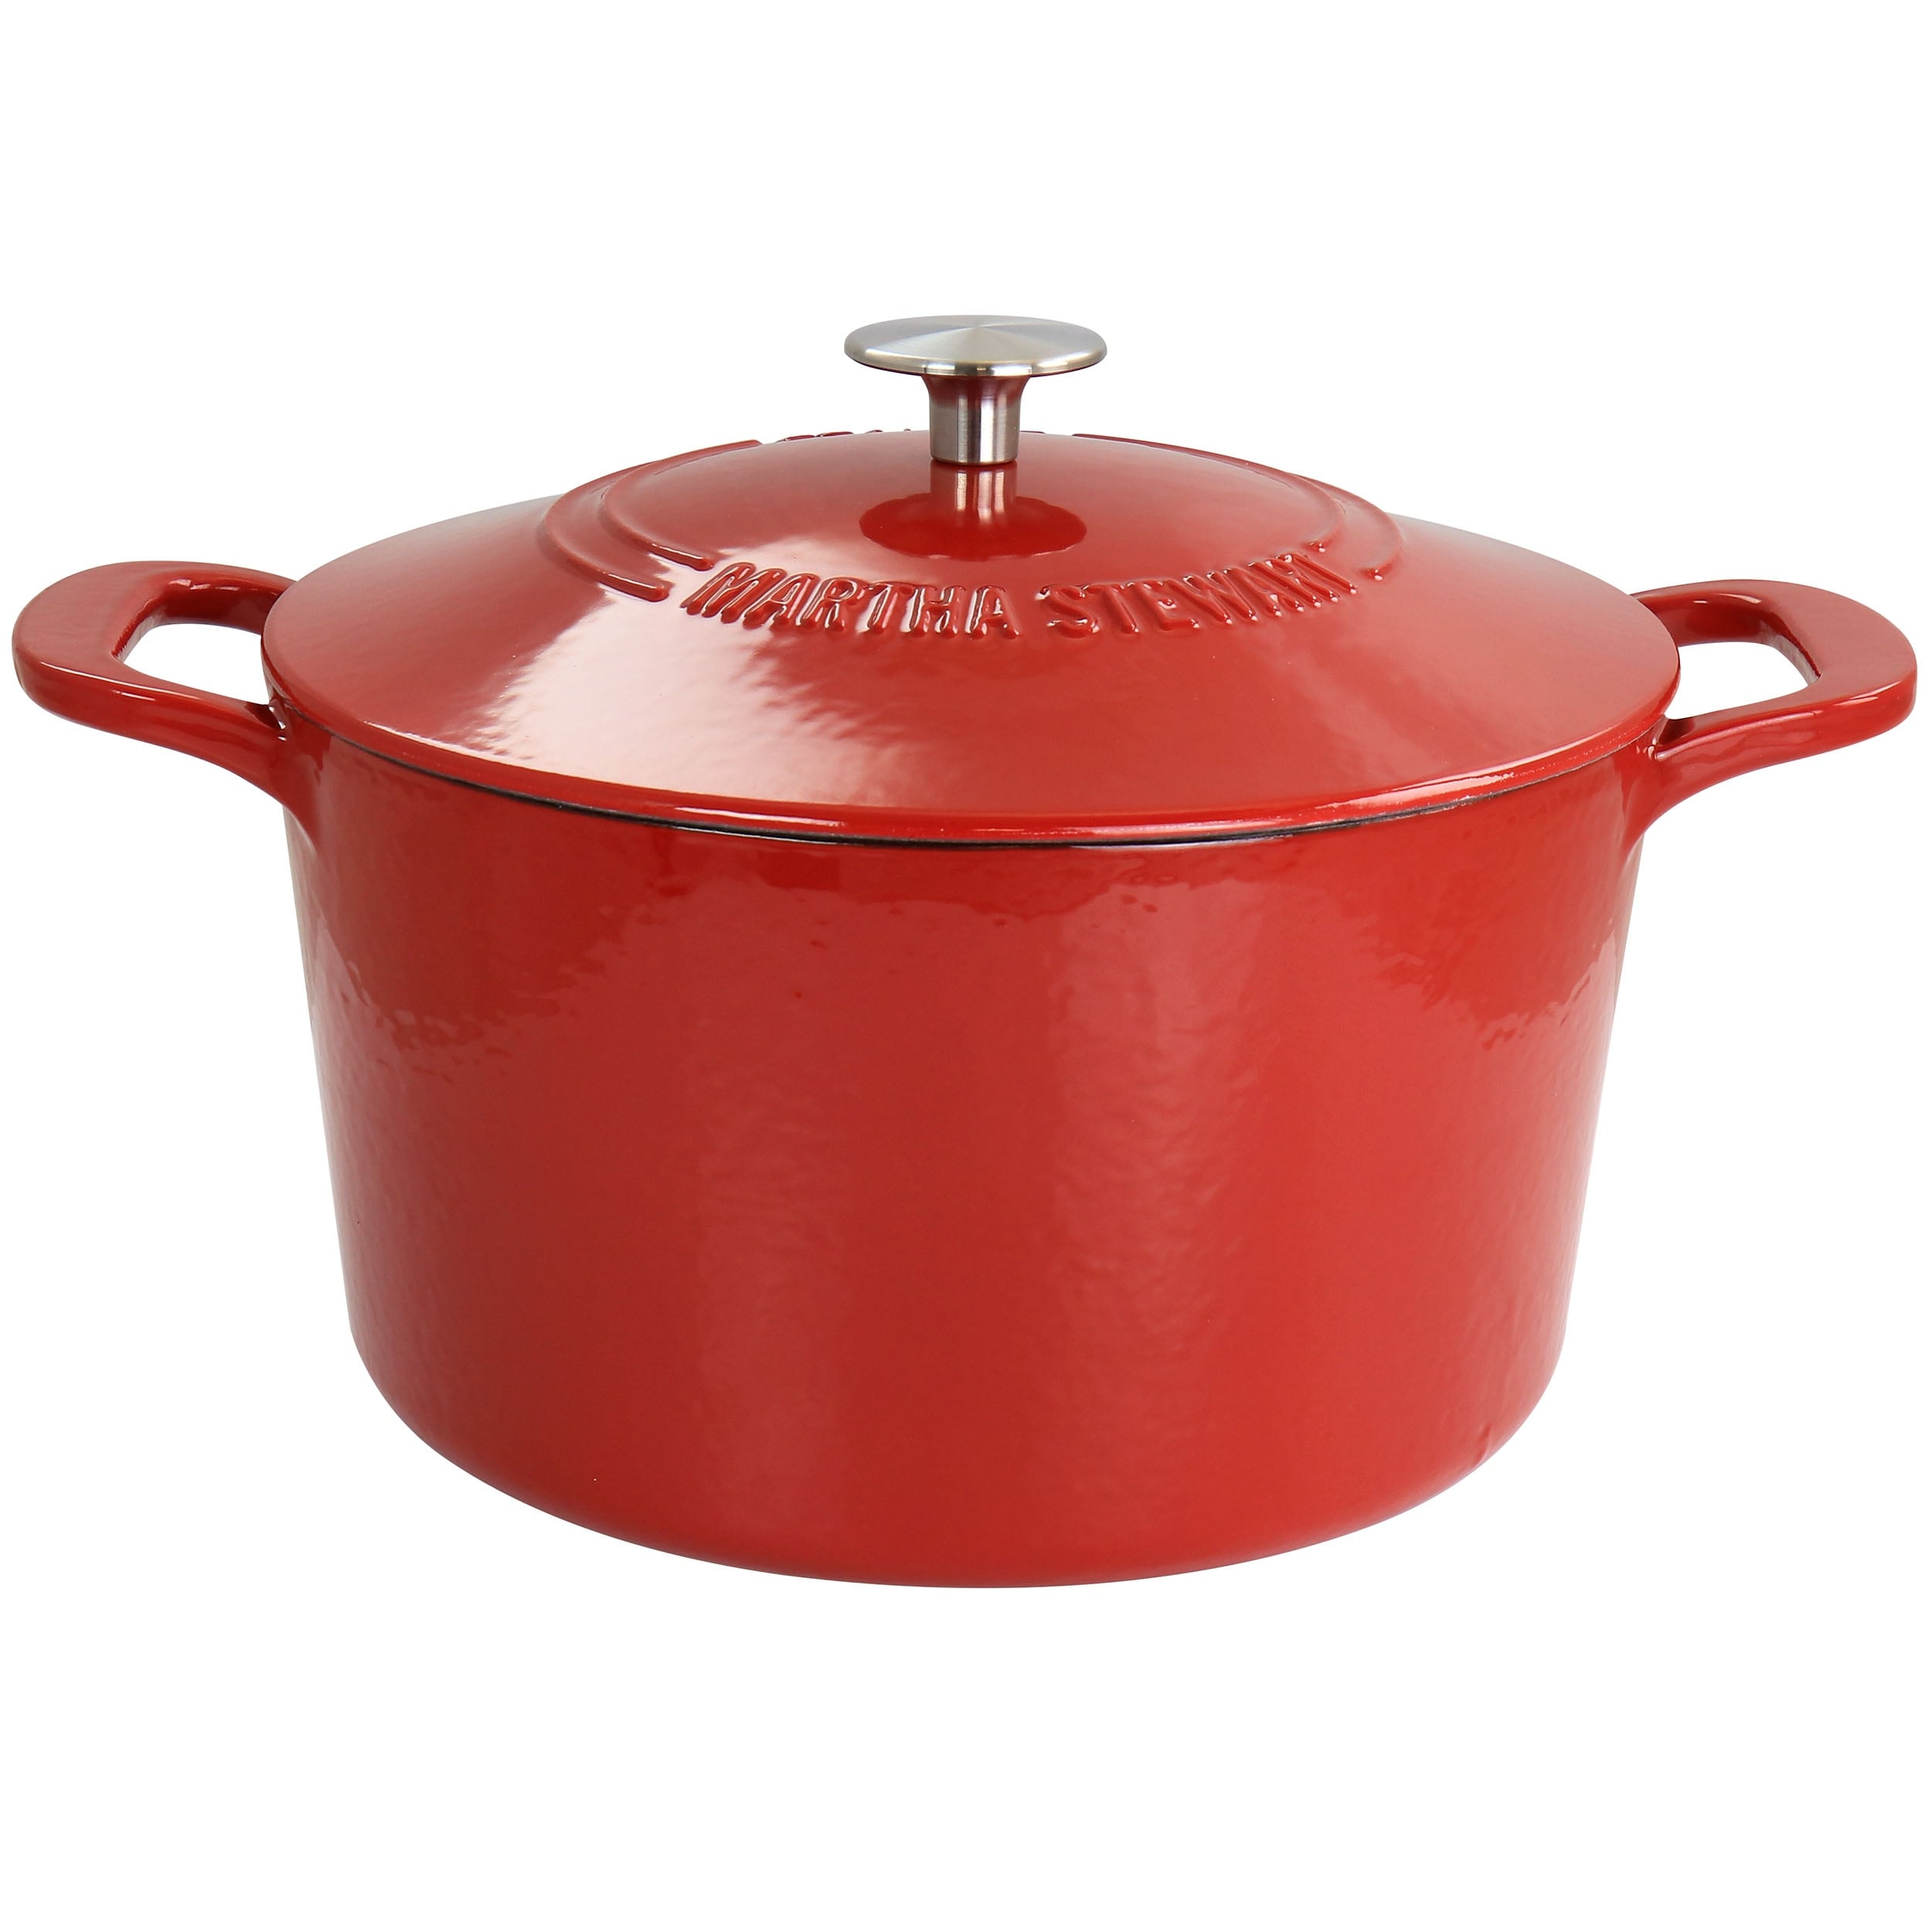 https://ak1.ostkcdn.com/images/products/is/images/direct/15da55952dc3b68a3b51d0fc63f19c4819191864/Martha-Stewart-Enameled-Cast-Iron-7-Quart-Dutch-Oven-with-Lid-in-Red.jpg